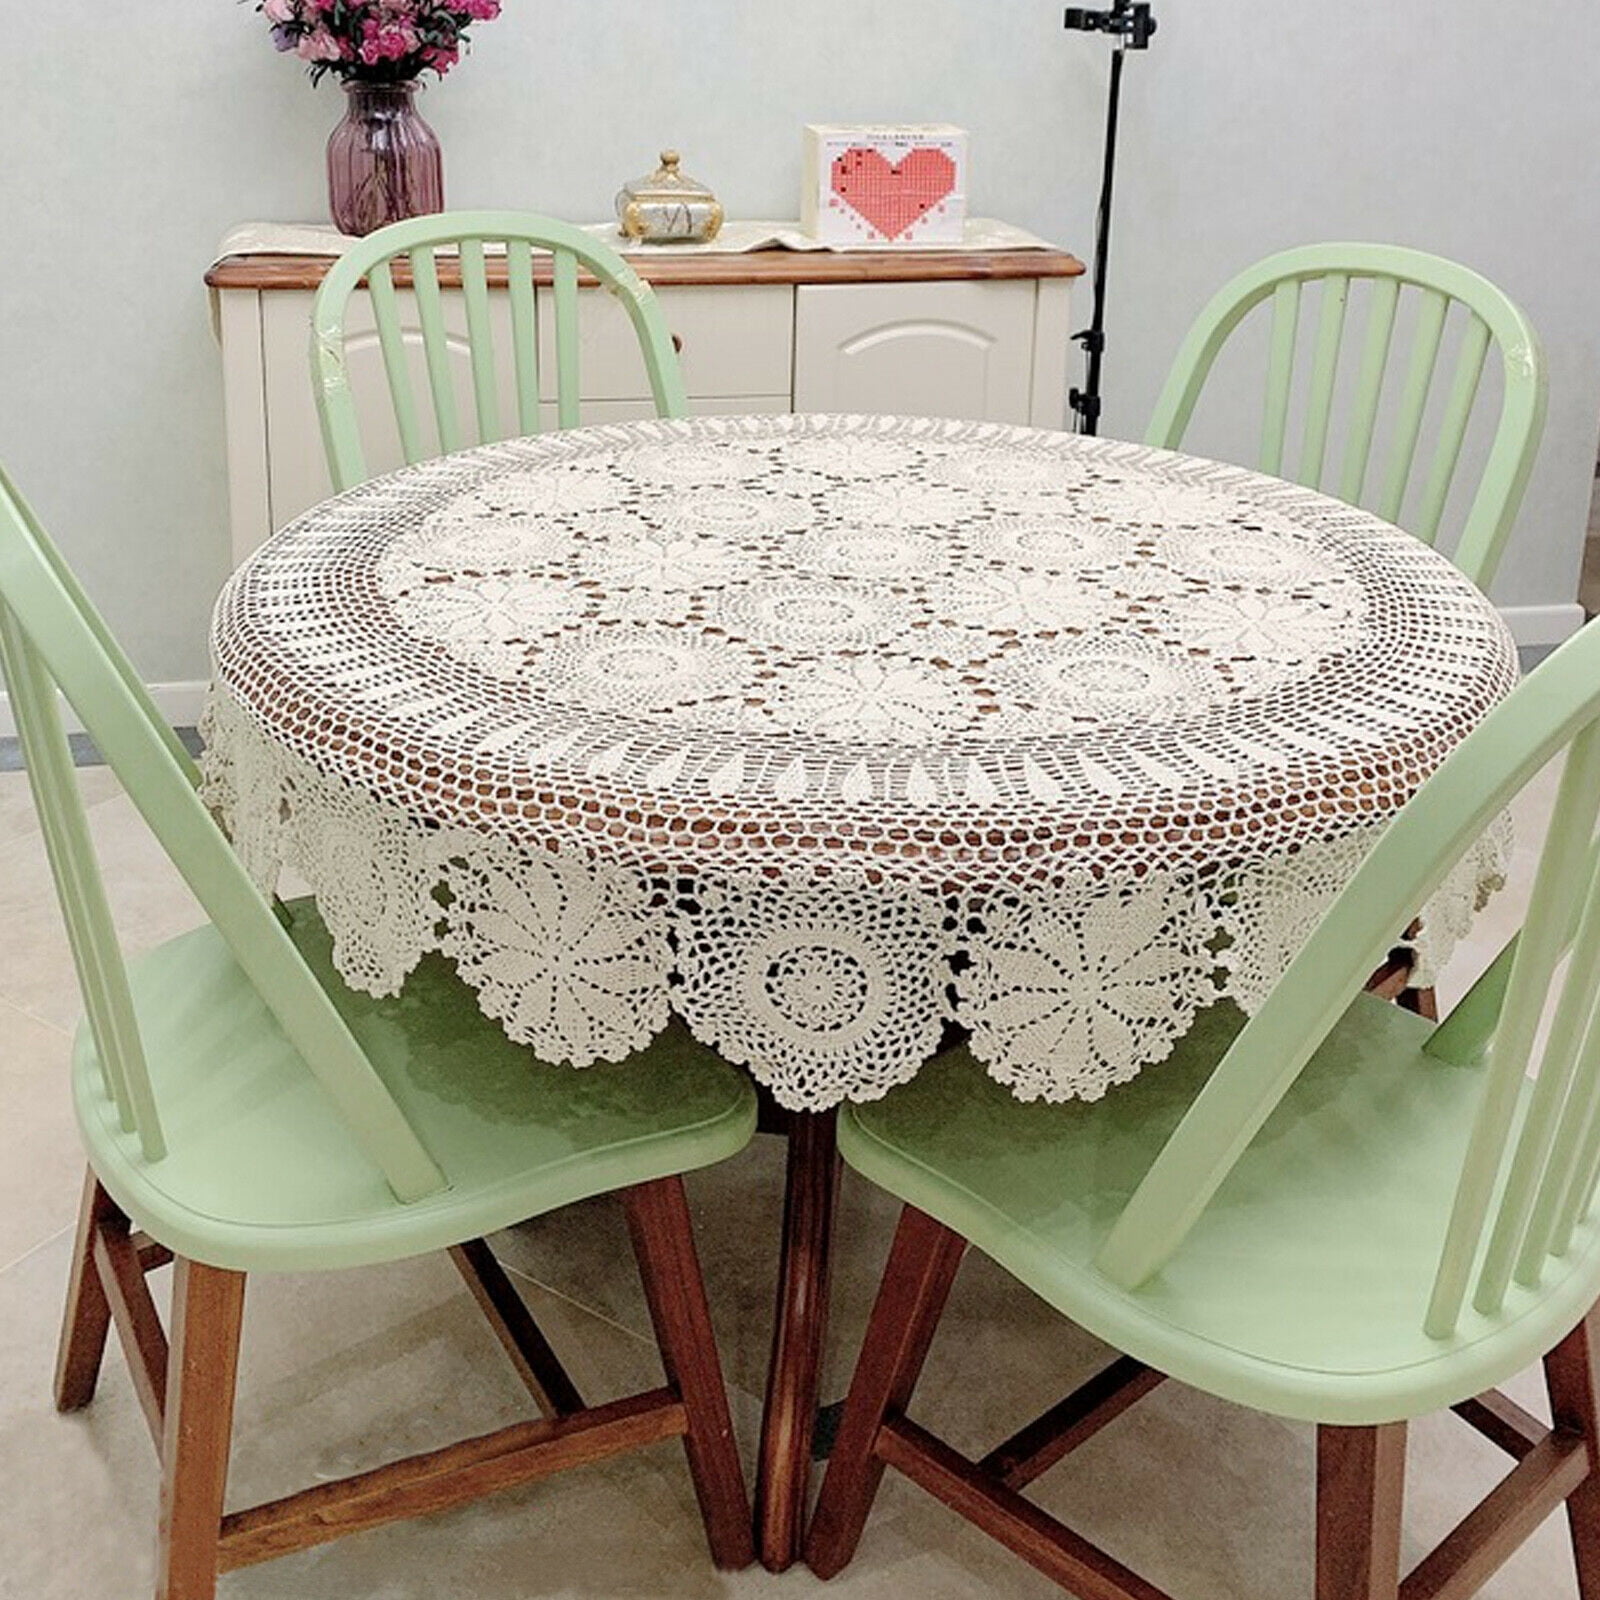 Vintage Hand Crochet Lace Doily Round Table Topper White Tablecloth Cover 51inch 